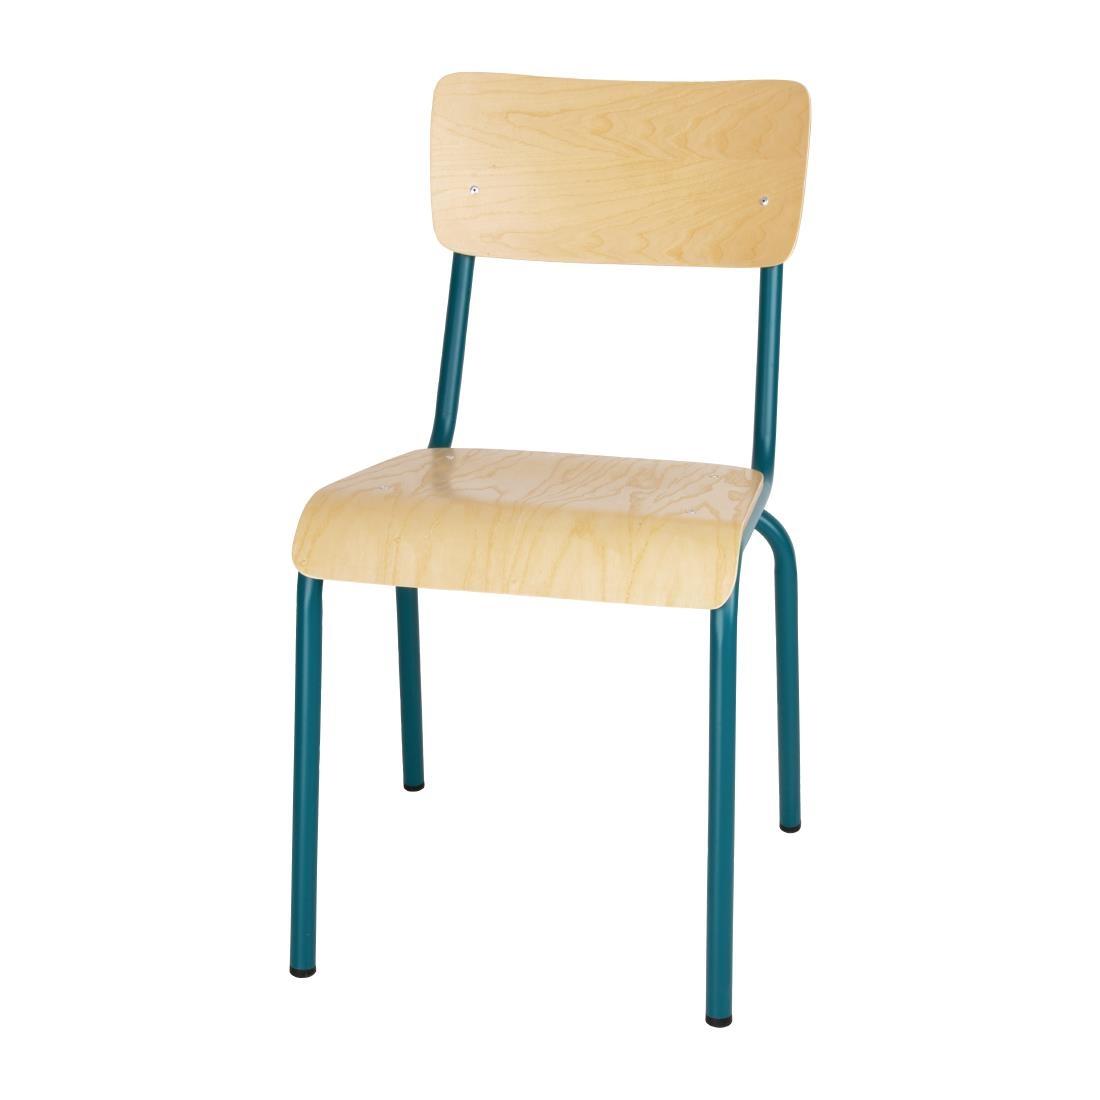 Bolero Cantina Side Chairs with Wooden Seat Pad and Backrest Teal (Pack of 4) - FB944  - 1